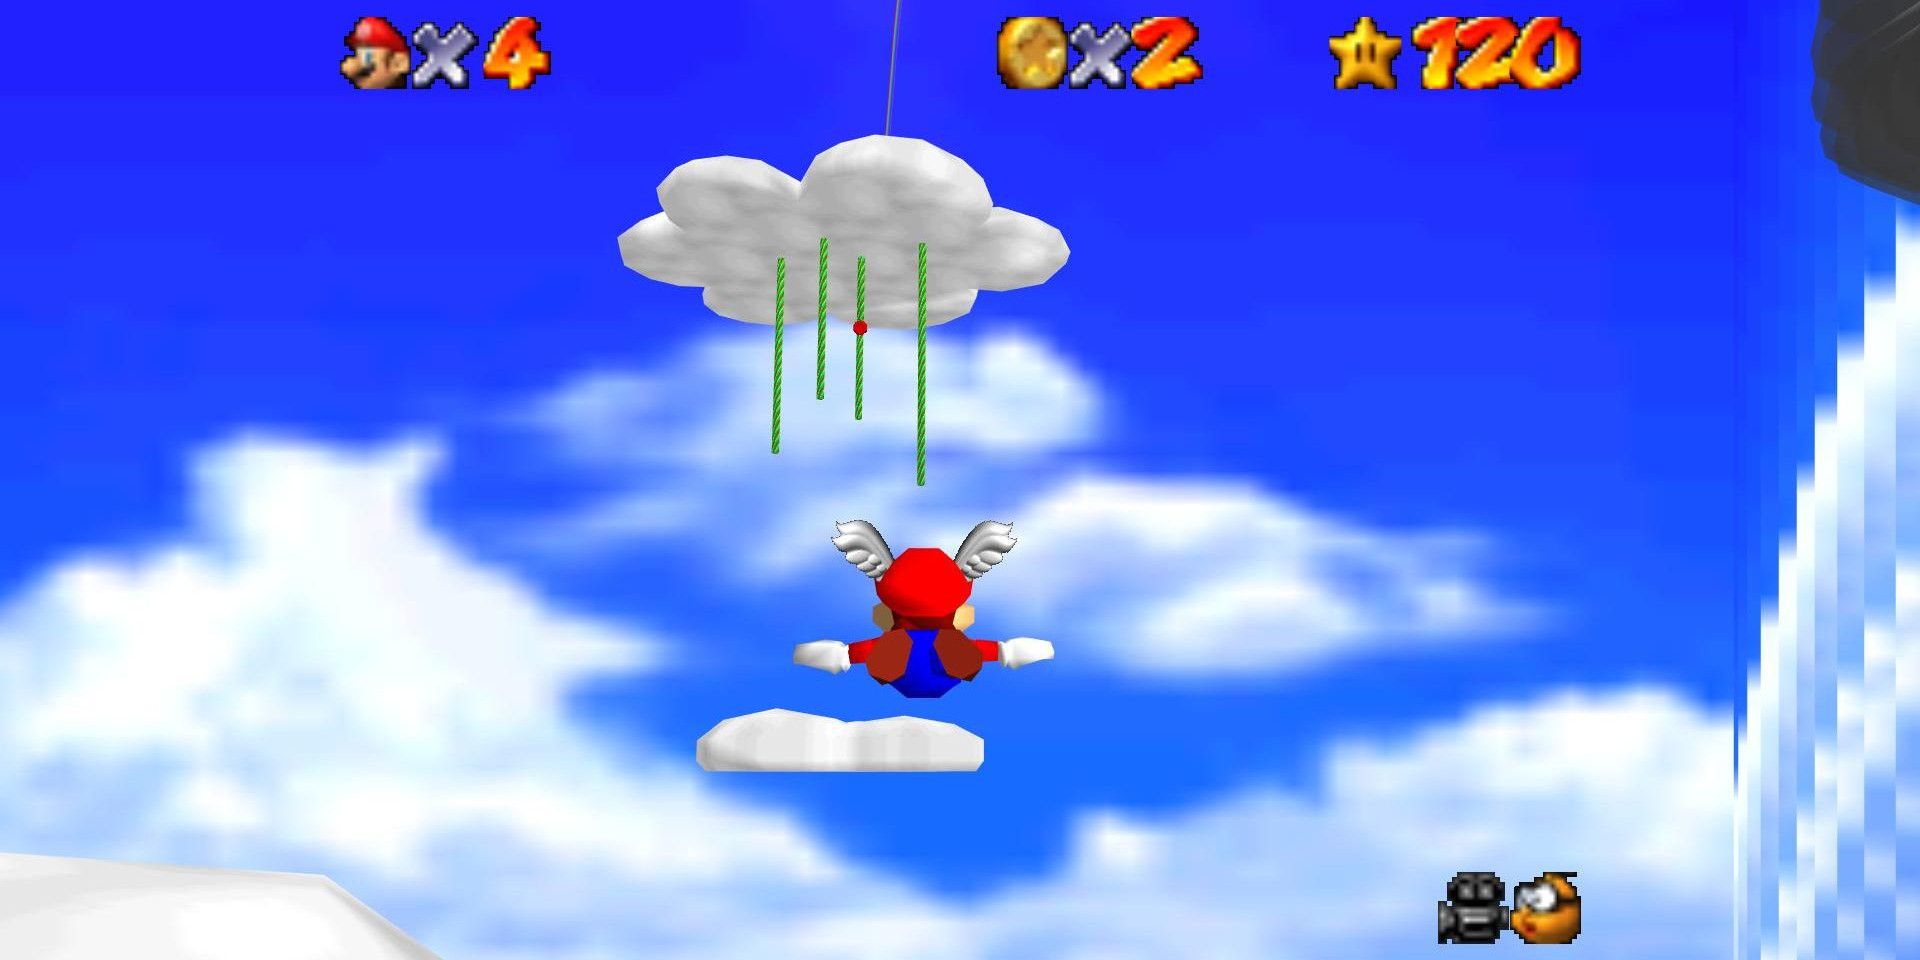 Wing Mario flying towards a cloud